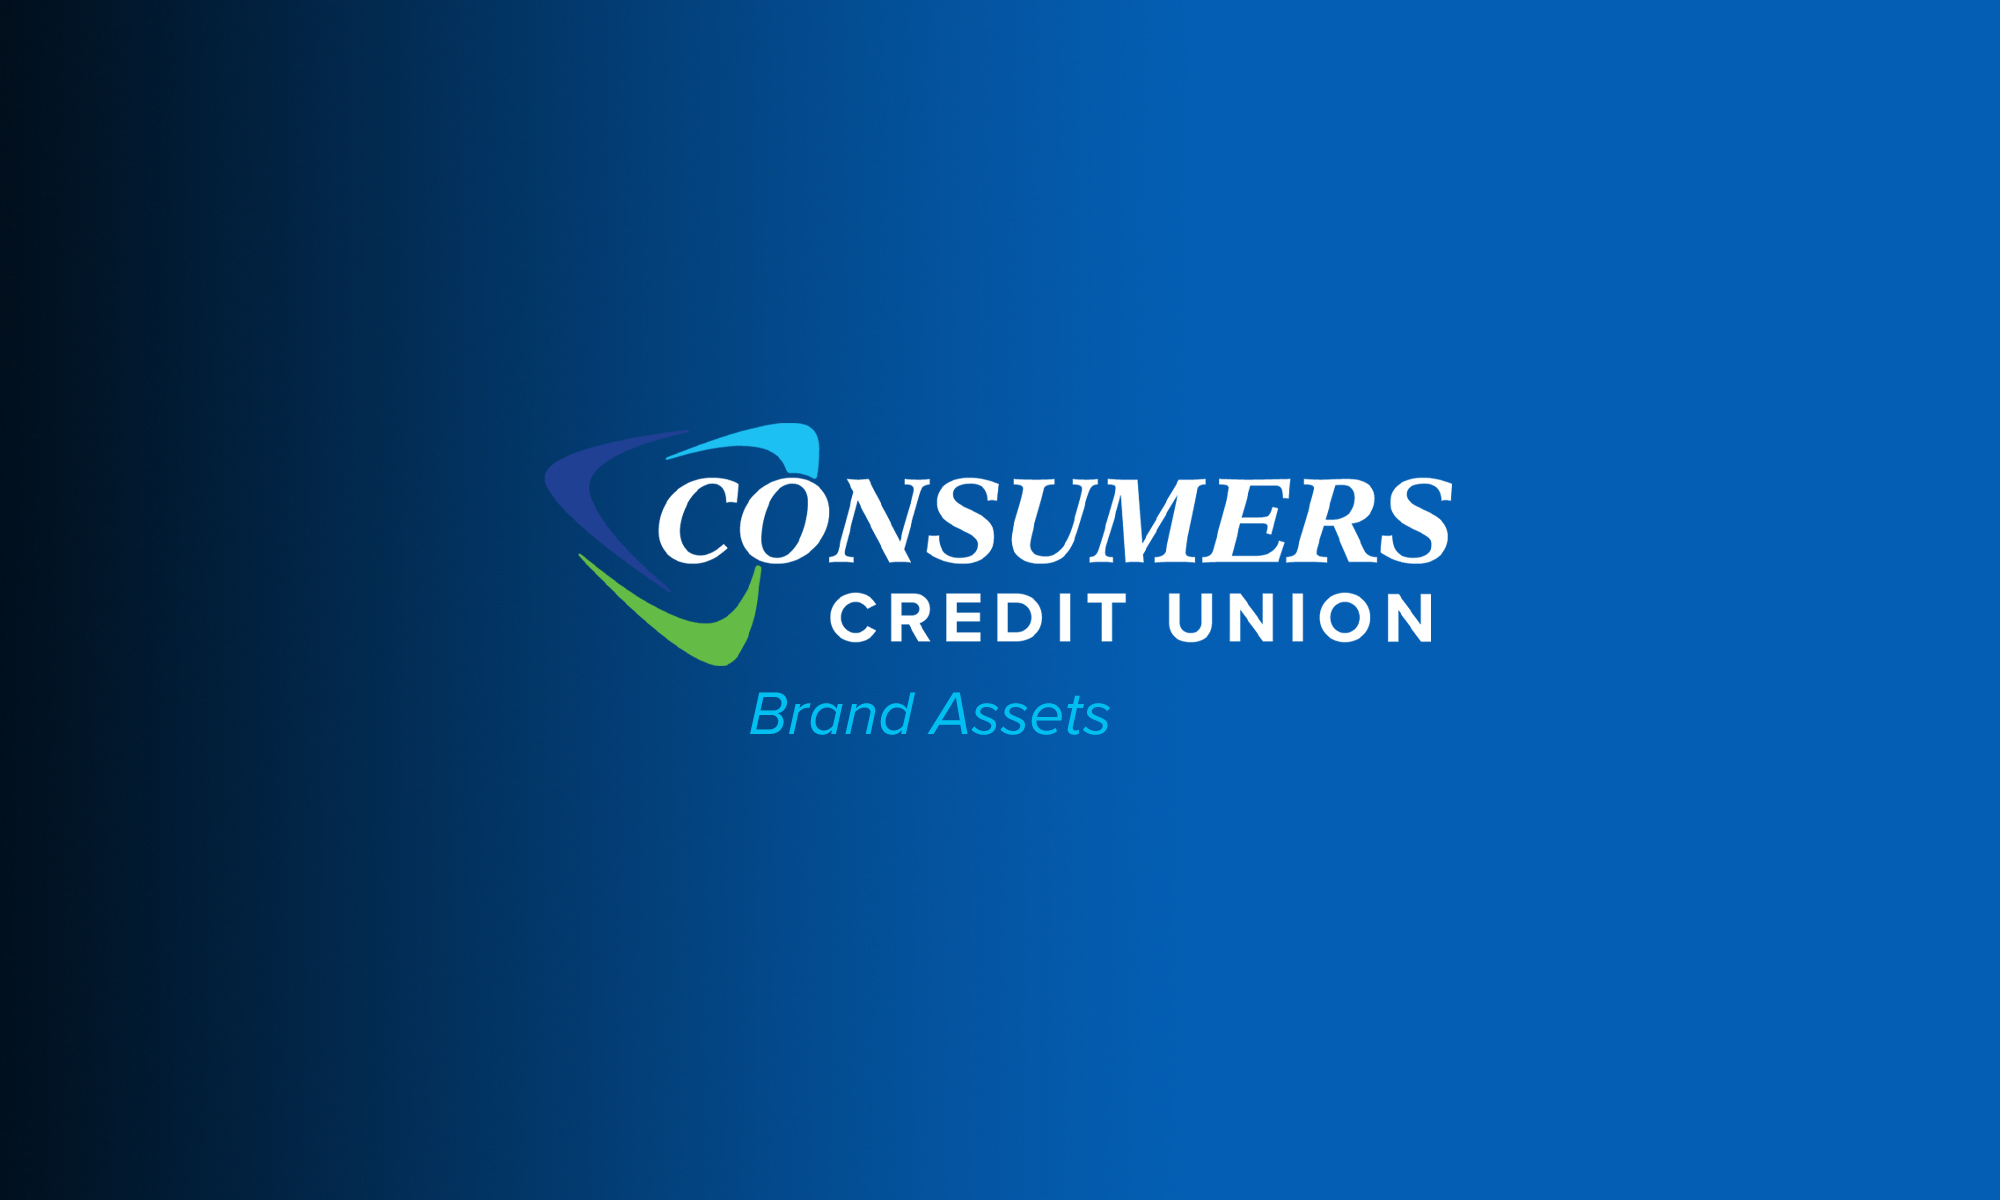 Consumers Credit Union brand assets